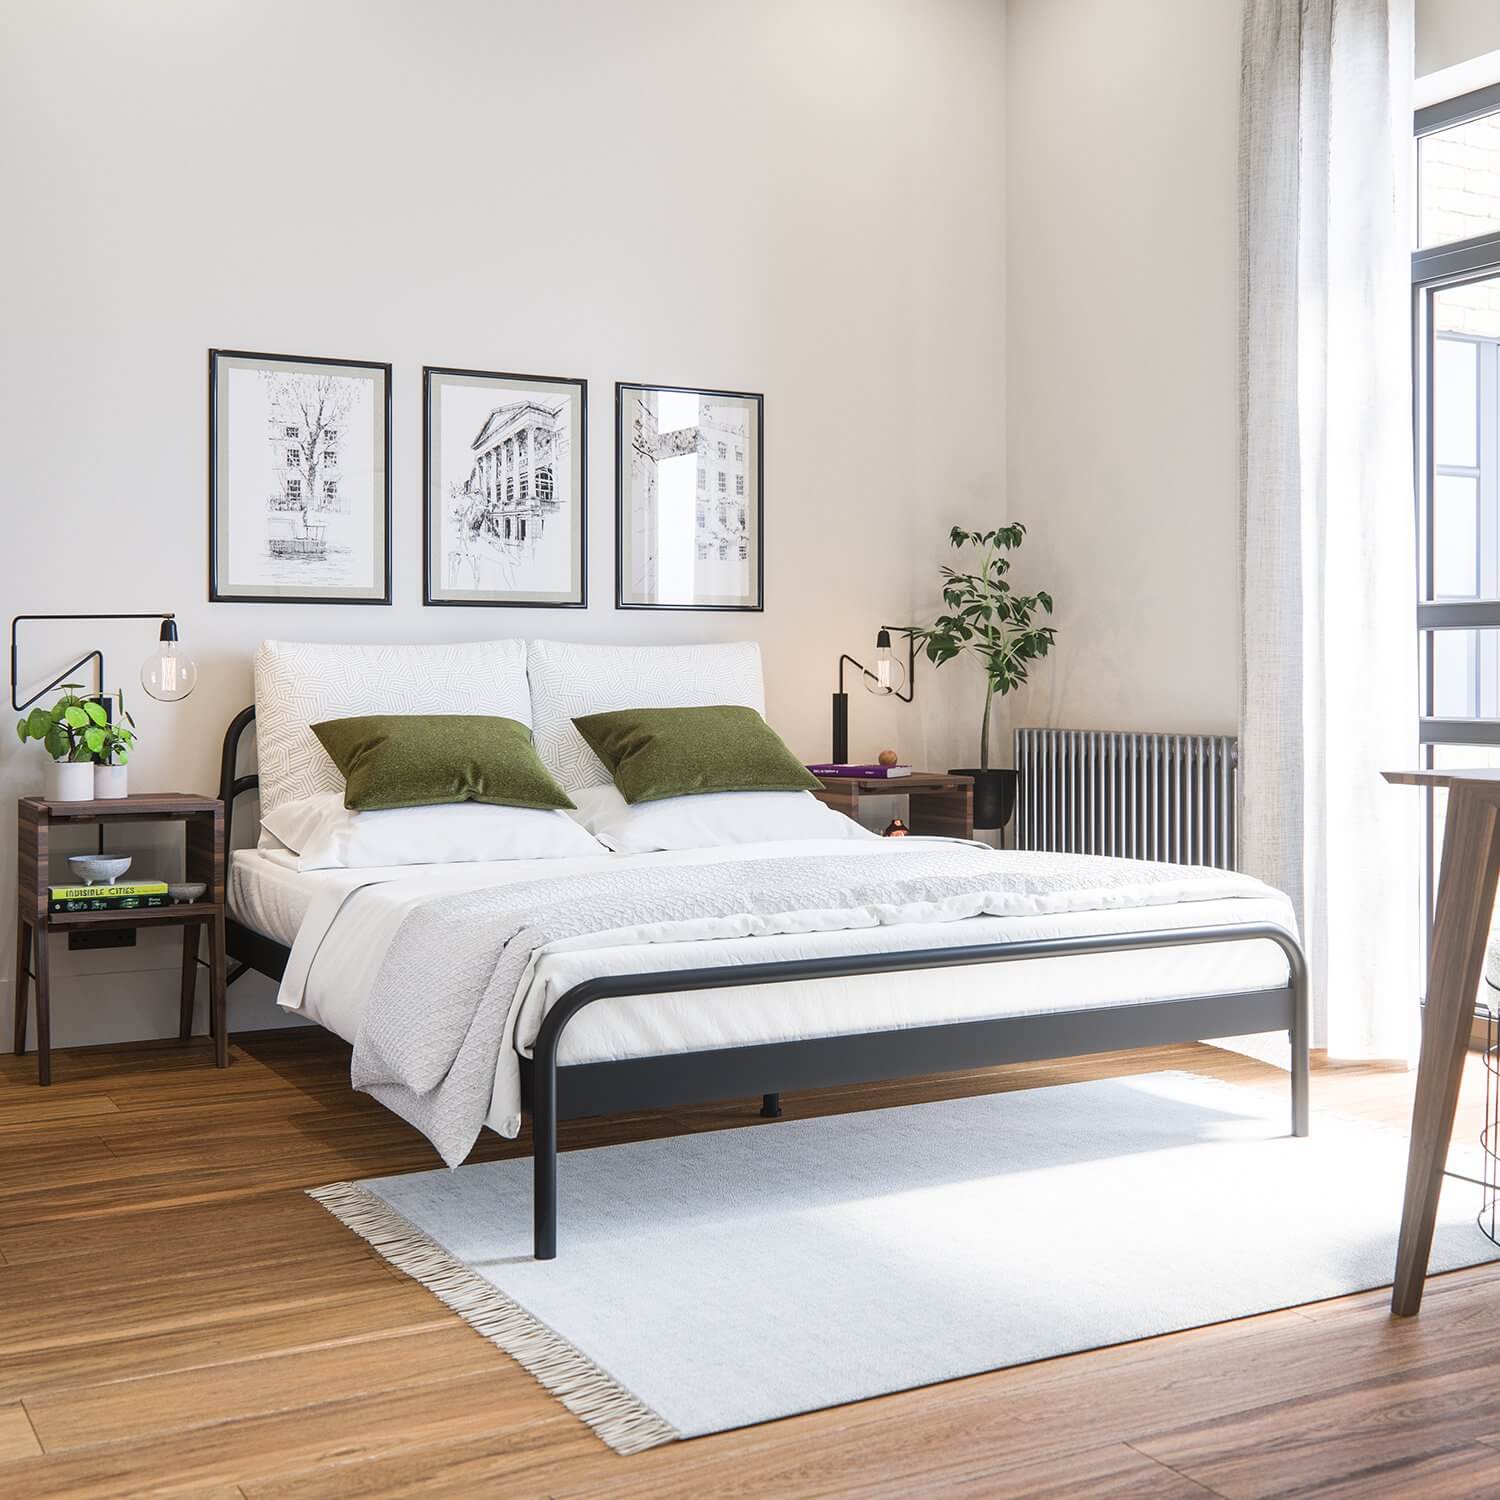 7 Old Town Clapham Apartment bedroom metal frame bed - cgi visualization